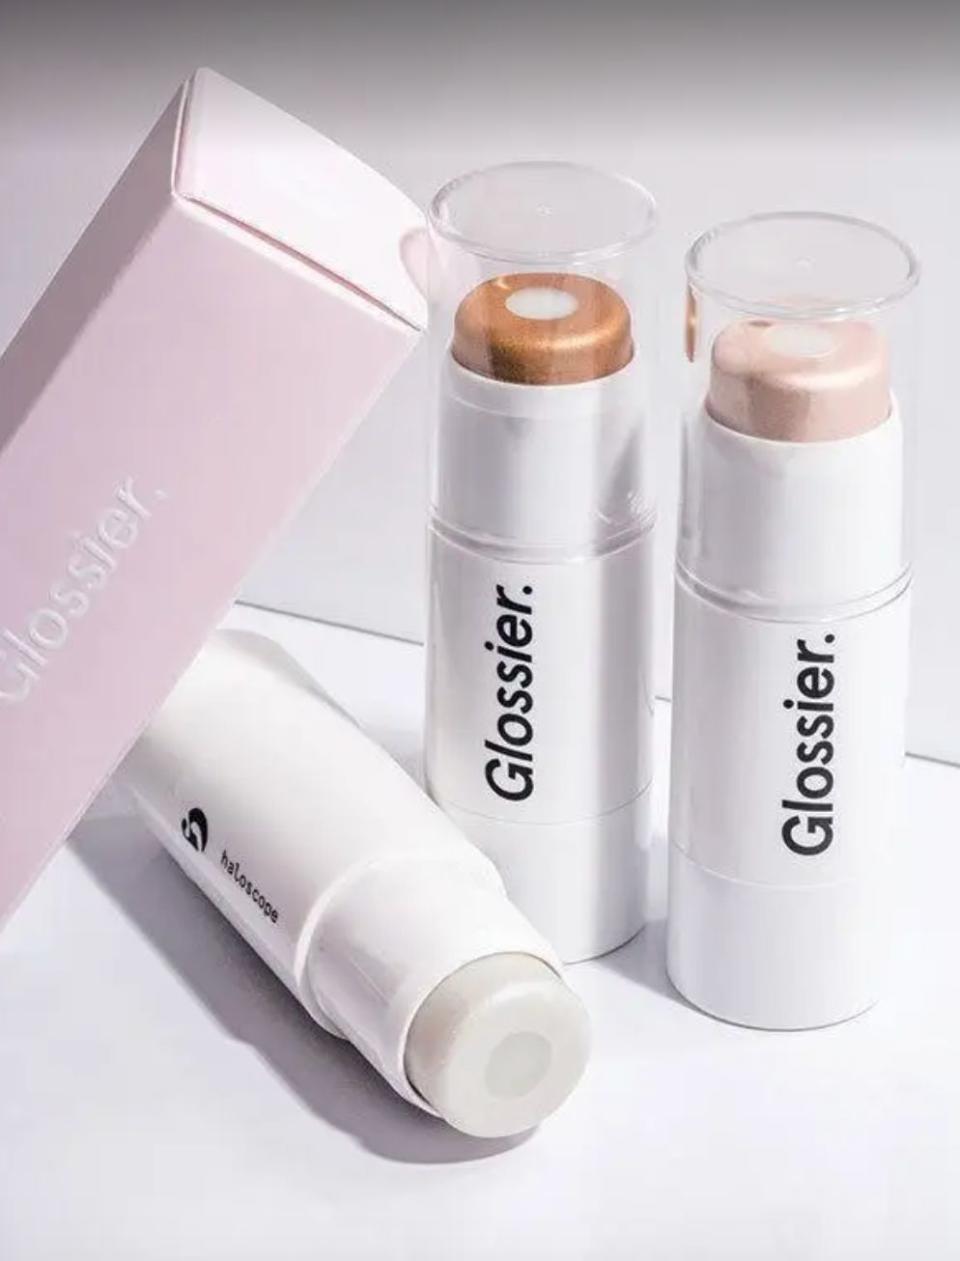 If you're ready to give your skin a dewy glow, this highlighter stick will get the job done and it's available in three different shades.<br /><br /><strong>Promising review:</strong> "Haloscope is fantastic. I use it on my nose, cupid's bow, eyelids, brow bone and cheekbones. It offers the perfect amount of dewy highlight that's not glittery. It's also super easy to apply and blends very well." &mdash; <a href="https://go.skimresources.com?id=38395X987171&amp;xs=1&amp;url=https%3A%2F%2Fwww.glossier.com%2Fproducts%2Fhaloscope&amp;xcust=HPMagicBeauty6091b722e4b04620270cedda" target="_blank" rel="nofollow noopener noreferrer" data-skimlinks-tracking="5906615" data-vars-affiliate="www.glossier.com" data-vars-campaign="BeautyProductsCouldBeMagicSuazo3-25-21-5906615-" data-vars-href="http://glossier.sjv.io/c/468058/431612/7573?subId1=BeautyProductsCouldBeMagicSuazo3-25-21-5906615-&amp;u=https%3A%2F%2Fwww.glossier.com%2Fproducts%2Fhaloscope" data-vars-keywords="skincare" data-vars-link-id="16602642" data-vars-price="" data-vars-product-id="21069732" data-vars-product-img="https://images.ctfassets.net/p3w8f4svwgcg/5ywp6m1Egd66sYAA1S3ixg/aee2659661f6c0440c548fc1a696af93/Haloscope.jpg?w=1400&amp;q=80&amp;fm=webp" data-vars-product-title="Haloscope" data-vars-redirecturl="https://www.glossier.com/products/haloscope" data-vars-retailers="Glossier,glossier" data-ml-dynamic="true" data-ml-dynamic-type="sl" data-orig-url="http://glossier.sjv.io/c/468058/431612/7573?subId1=BeautyProductsCouldBeMagicSuazo3-25-21-5906615-&amp;u=https%3A%2F%2Fwww.glossier.com%2Fproducts%2Fhaloscope" data-ml-id="55">AO<br /><br /></a><strong>Get it from Glossier for <a href="https://go.skimresources.com?id=38395X987171&amp;xs=1&amp;url=https%3A%2F%2Fwww.glossier.com%2Fproducts%2Fhaloscope&amp;xcust=HPMagicBeauty6091b722e4b04620270cedda" target="_blank" rel="nofollow noopener noreferrer" data-skimlinks-tracking="5906615" data-vars-affiliate="www.glossier.com" data-vars-campaign="BeautyProductsCouldBeMagicSuazo3-25-21-5906615-" data-vars-href="http://glossier.sjv.io/c/468058/431612/7573?subId1=BeautyProductsCouldBeMagicSuazo3-25-21-5906615-&amp;u=https%3A%2F%2Fwww.glossier.com%2Fproducts%2Fhaloscope" data-vars-keywords="skincare" data-vars-link-id="16602642" data-vars-price="" data-vars-product-id="21069732" data-vars-product-img="https://images.ctfassets.net/p3w8f4svwgcg/5ywp6m1Egd66sYAA1S3ixg/aee2659661f6c0440c548fc1a696af93/Haloscope.jpg?w=1400&amp;q=80&amp;fm=webp" data-vars-product-title="Haloscope" data-vars-redirecturl="https://www.glossier.com/products/haloscope" data-vars-retailers="Glossier,glossier" data-ml-dynamic="true" data-ml-dynamic-type="sl" data-orig-url="http://glossier.sjv.io/c/468058/431612/7573?subId1=BeautyProductsCouldBeMagicSuazo3-25-21-5906615-&amp;u=https%3A%2F%2Fwww.glossier.com%2Fproducts%2Fhaloscope" data-ml-id="56">$22</a> (available in three shades).<br /><br /></strong><i>Some reviews have been edited for length and/or clarity.</i>